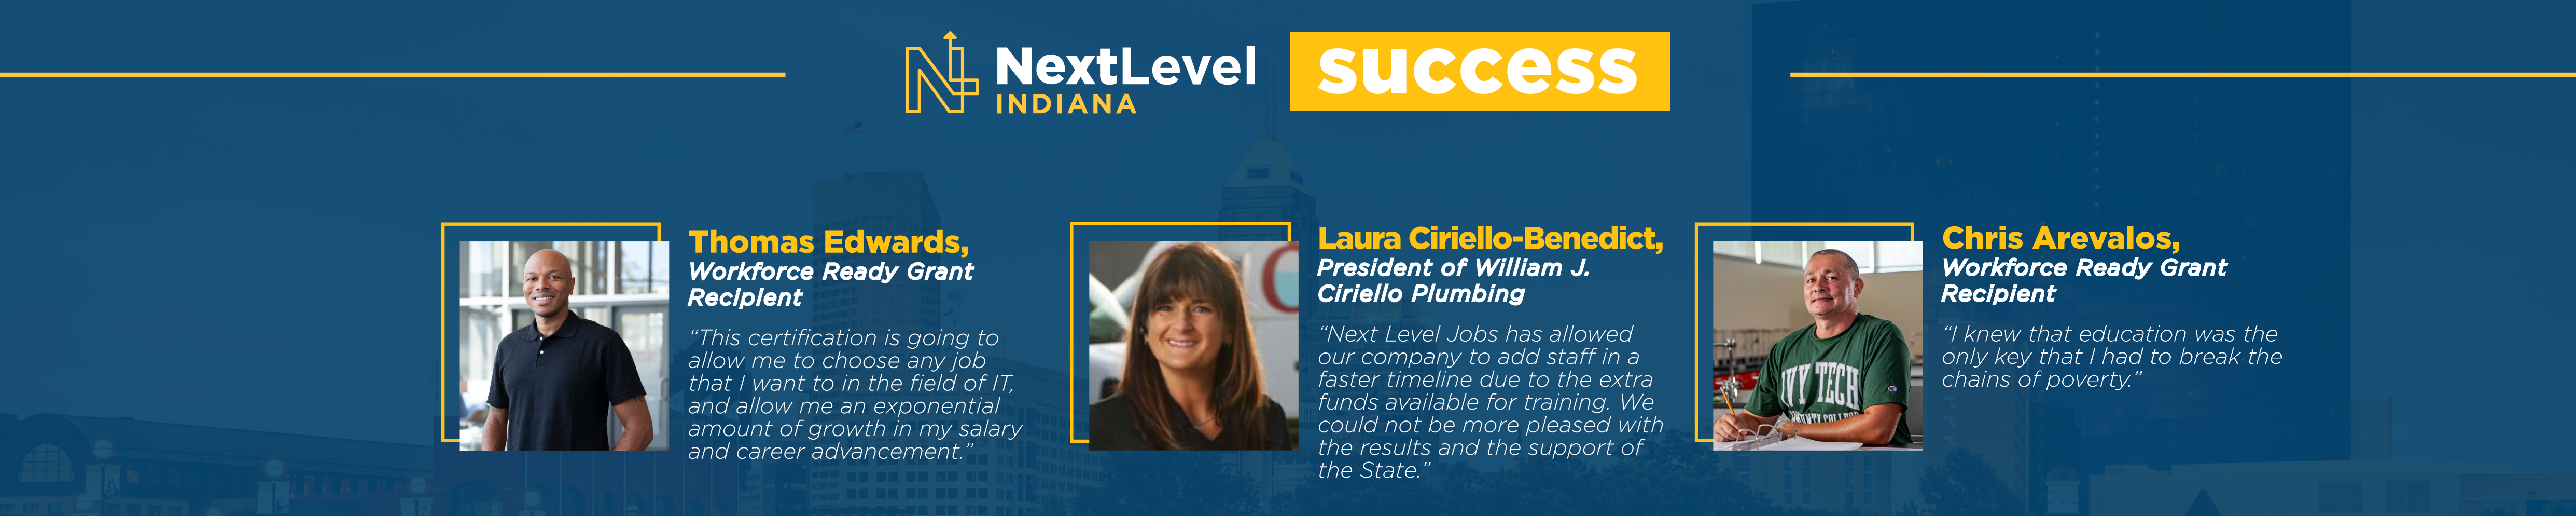 Next Level Indiana Success graphic. Image contains brief quotes from three people helped by Next Level Jobs; Thomas Edwards a WRG recipient, Laura Ciriello-Benedict a business owner, and Chris Arevalos a WRG recipient.